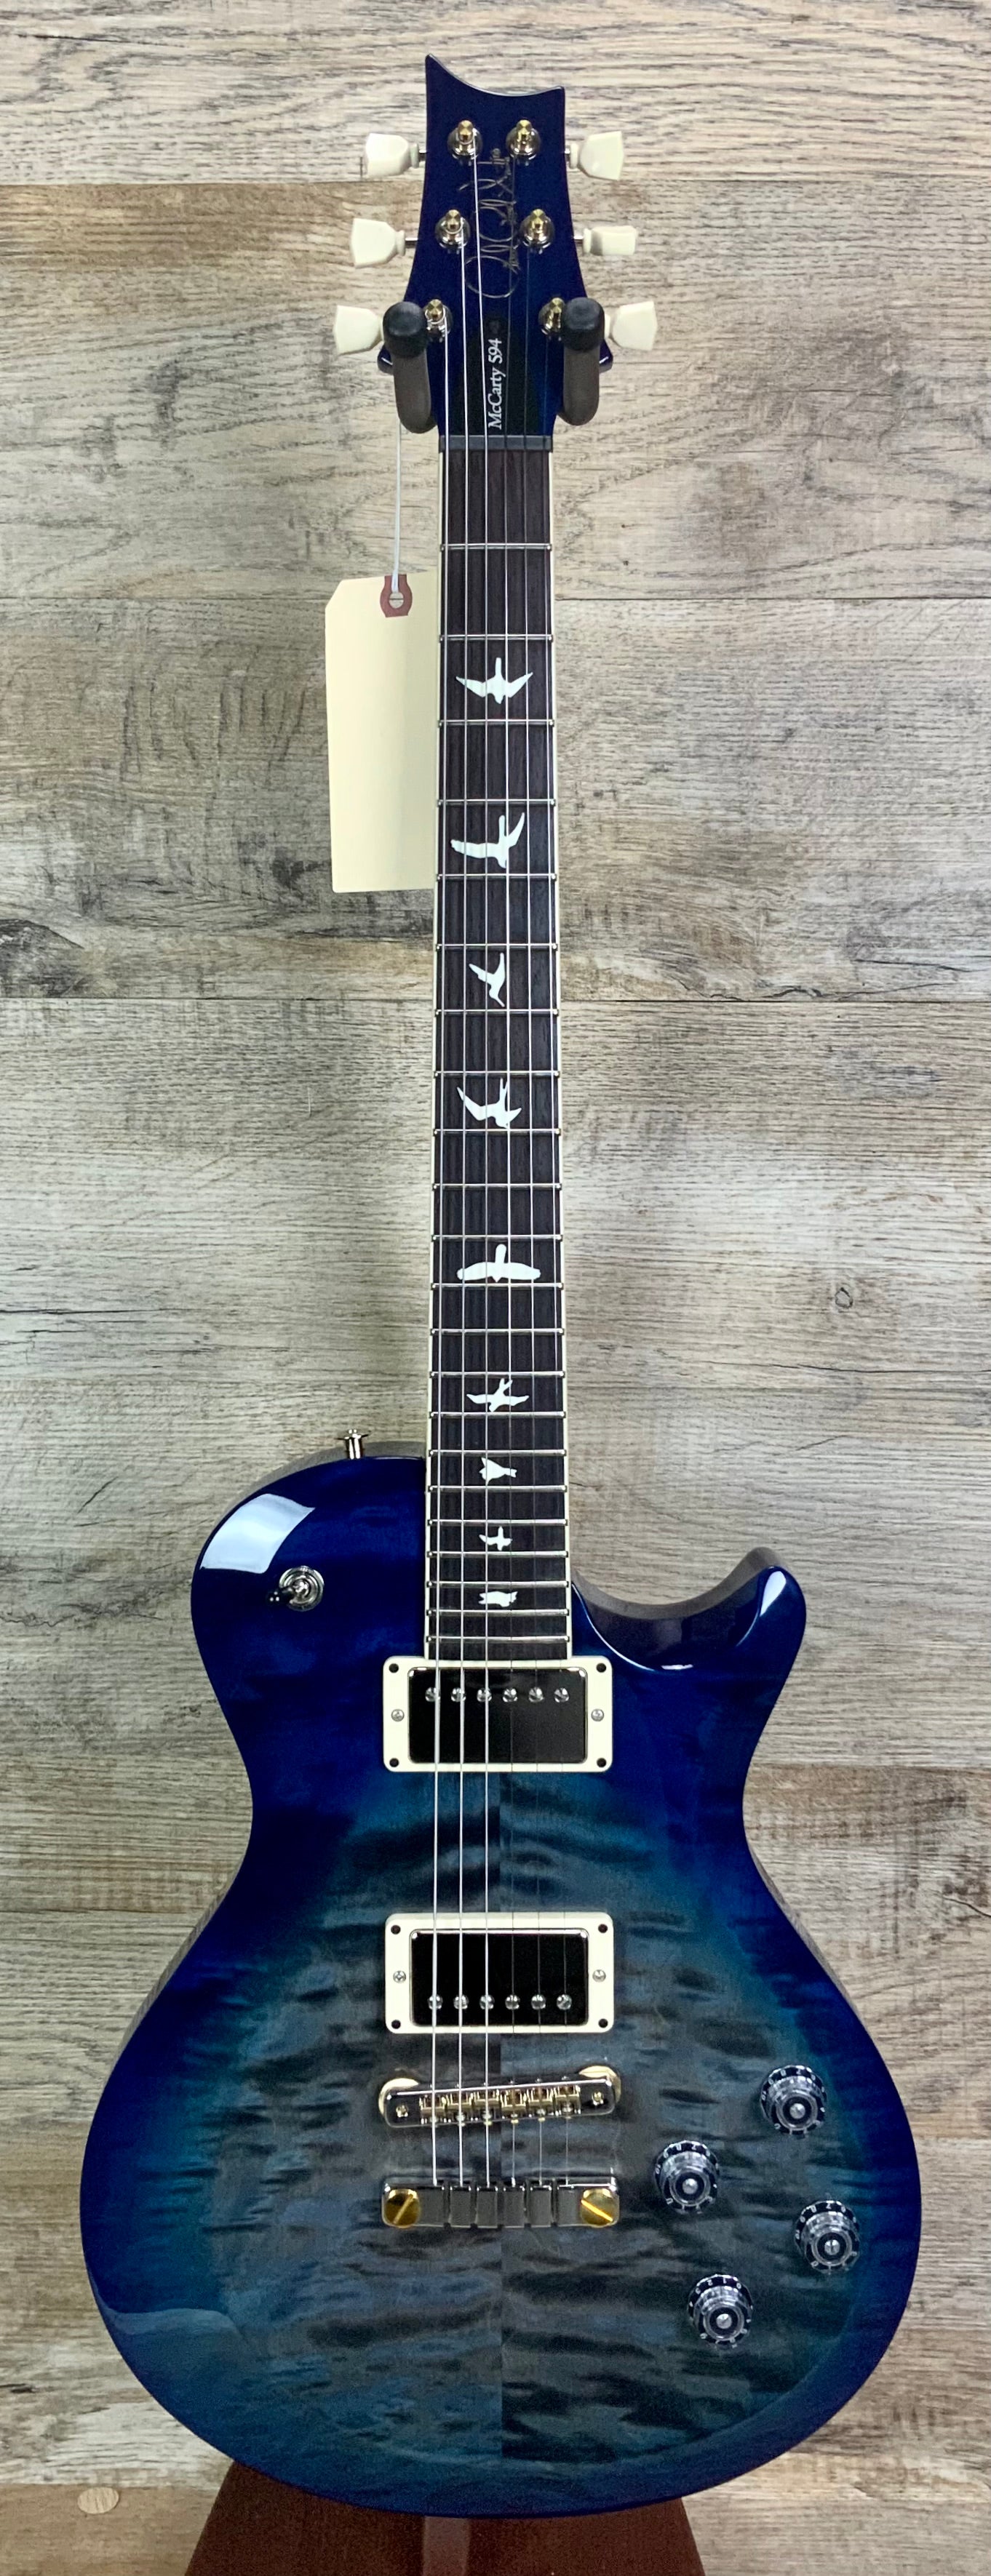 Full frontal of PRS Paul Reed Smith S2 McCarty 594 Singlecut Quilt Faded Gray Black Blue Burst.